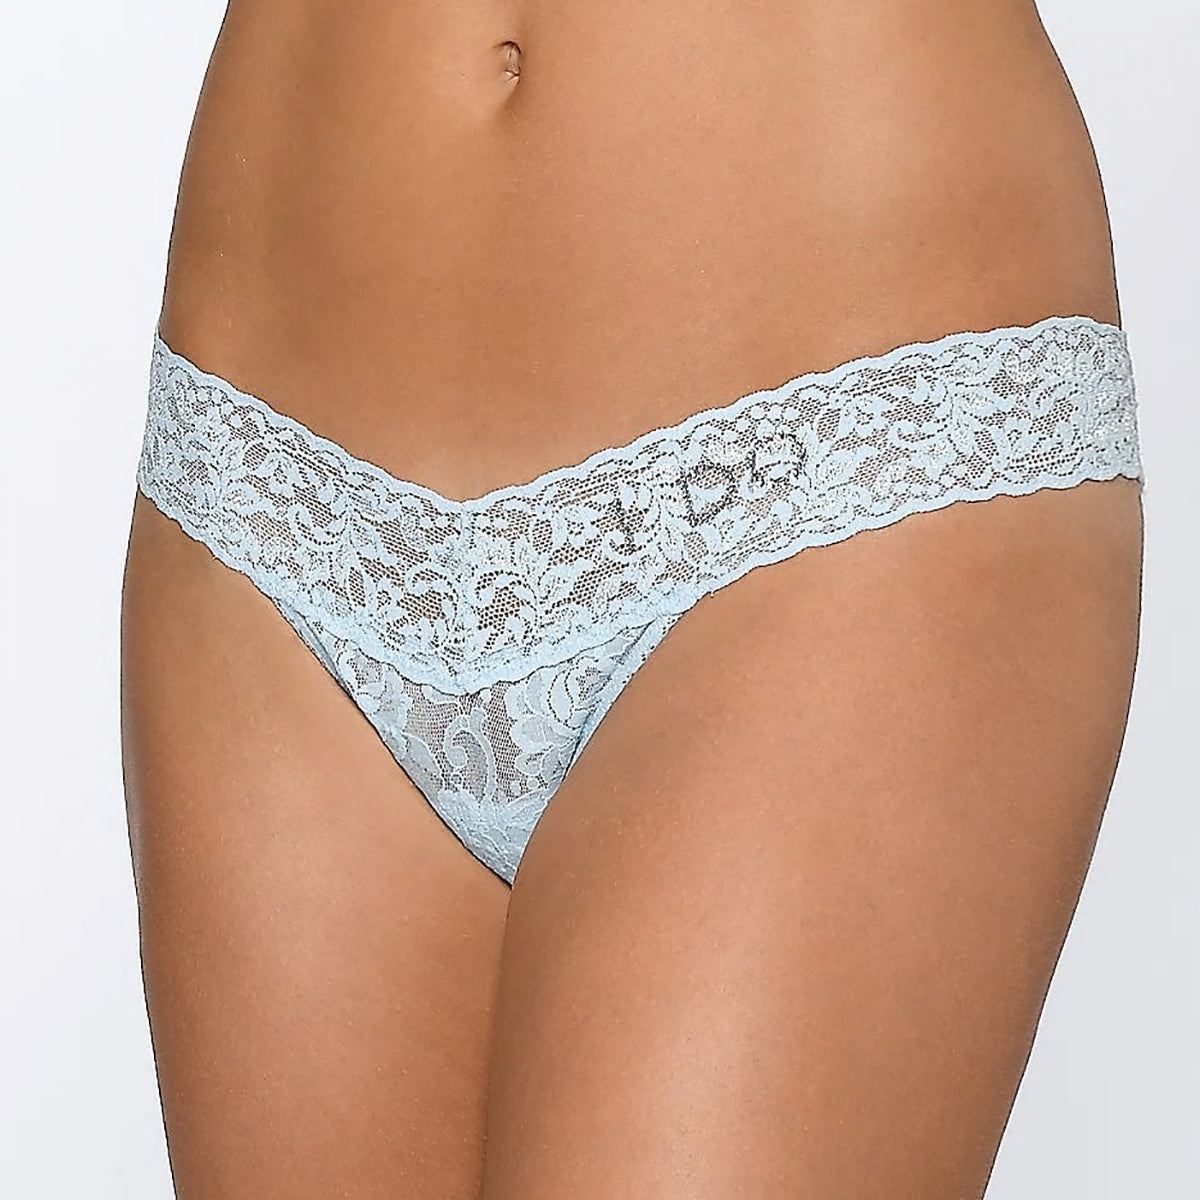 Hanky Panky "I DO" Lace Low Rise Thong 6510 in Blue